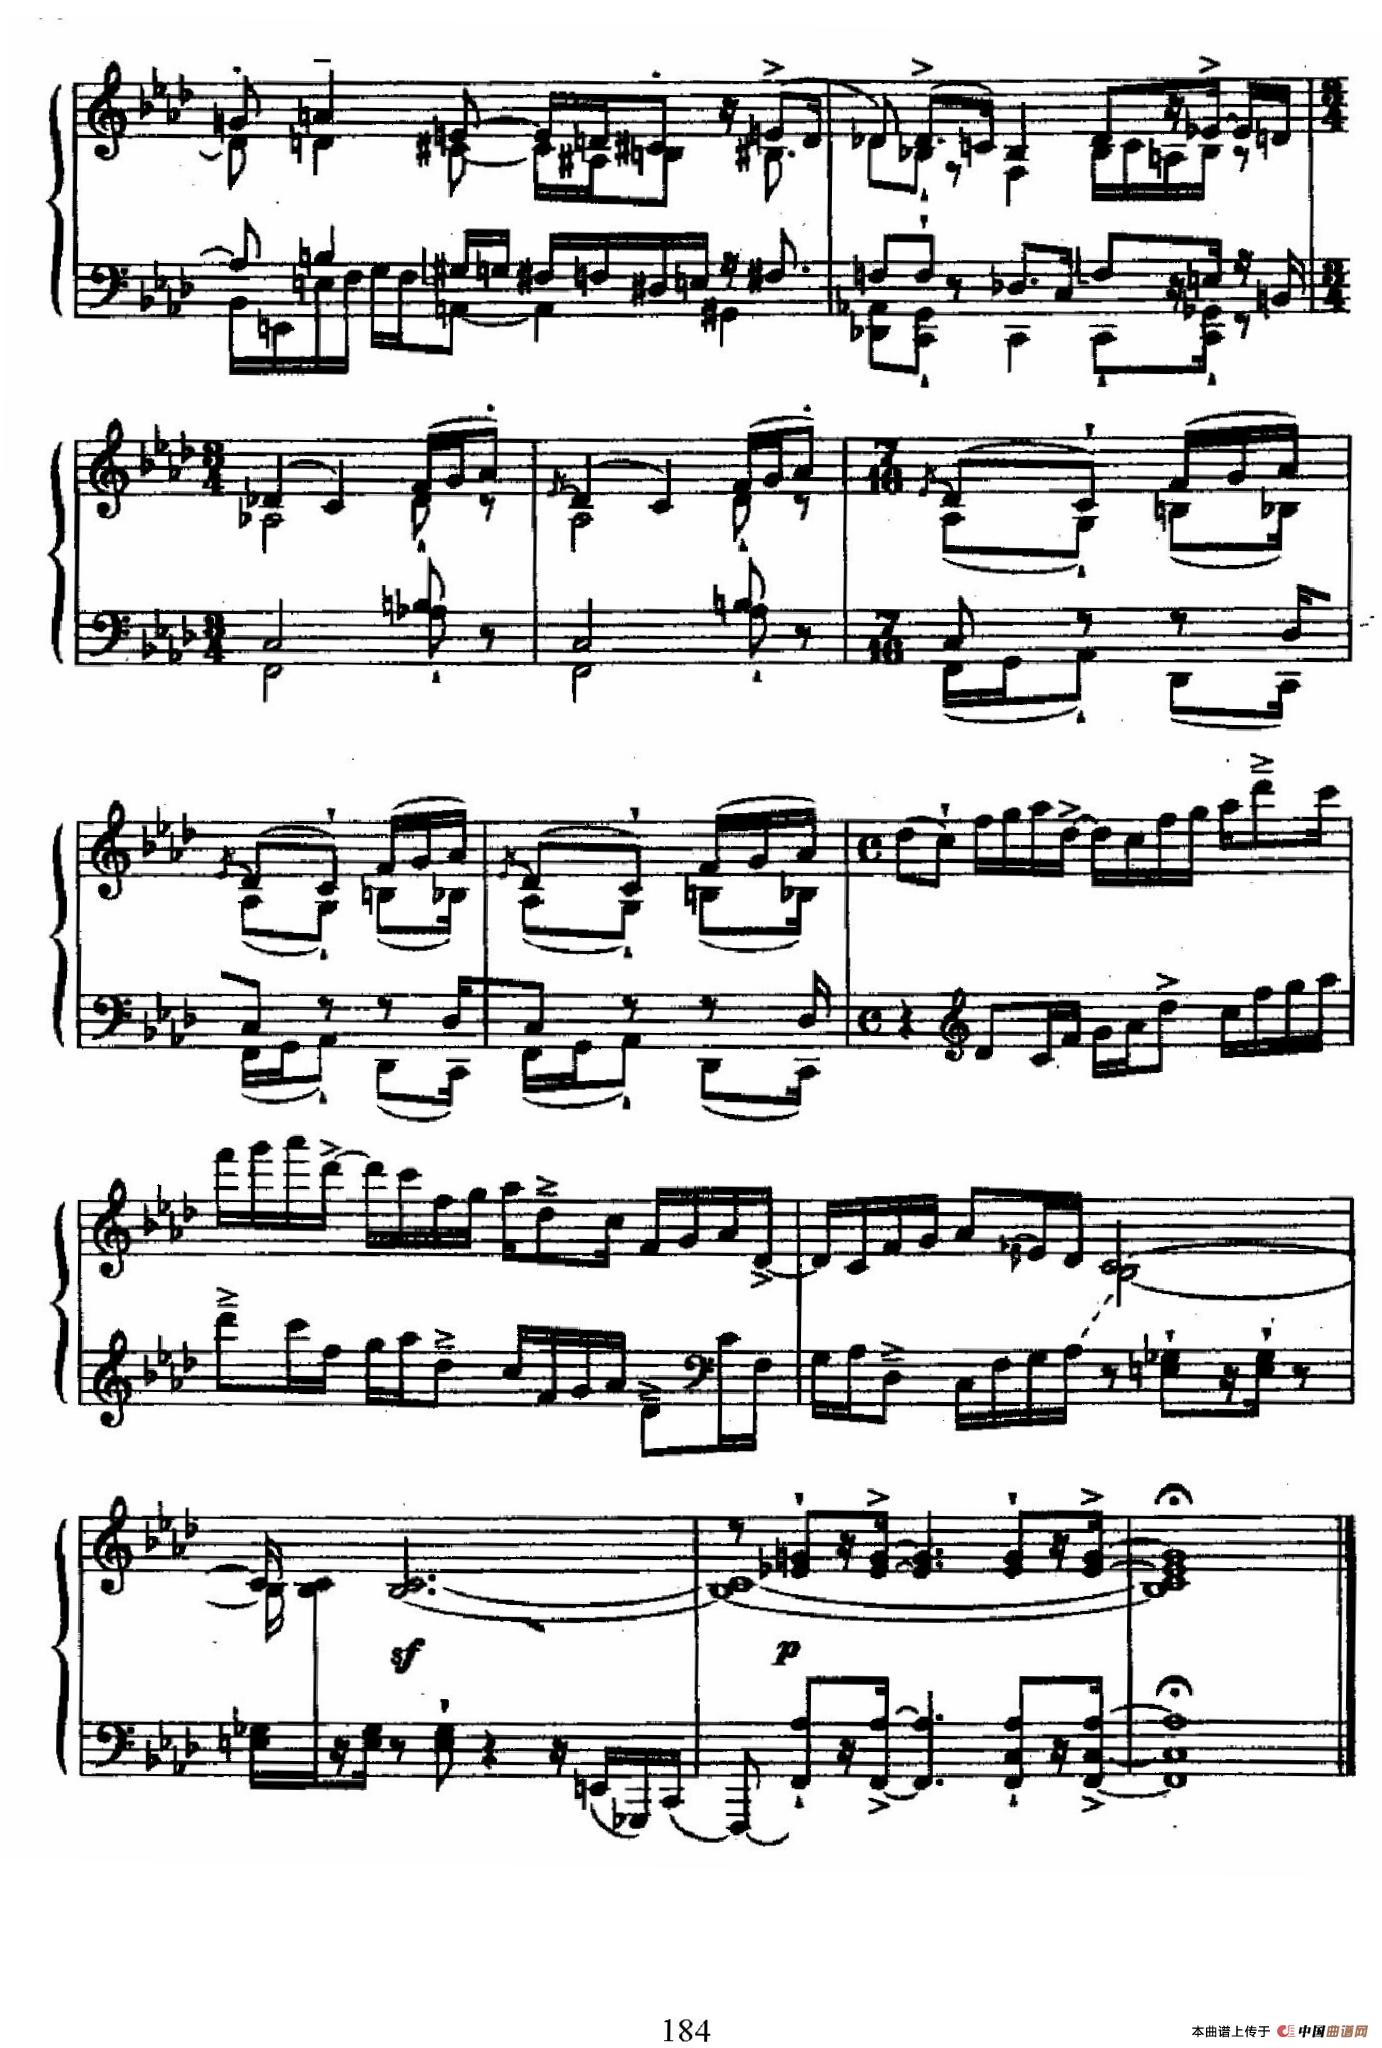 24 Preludes and Fugues Op.82（24首前奏曲与赋格·20）